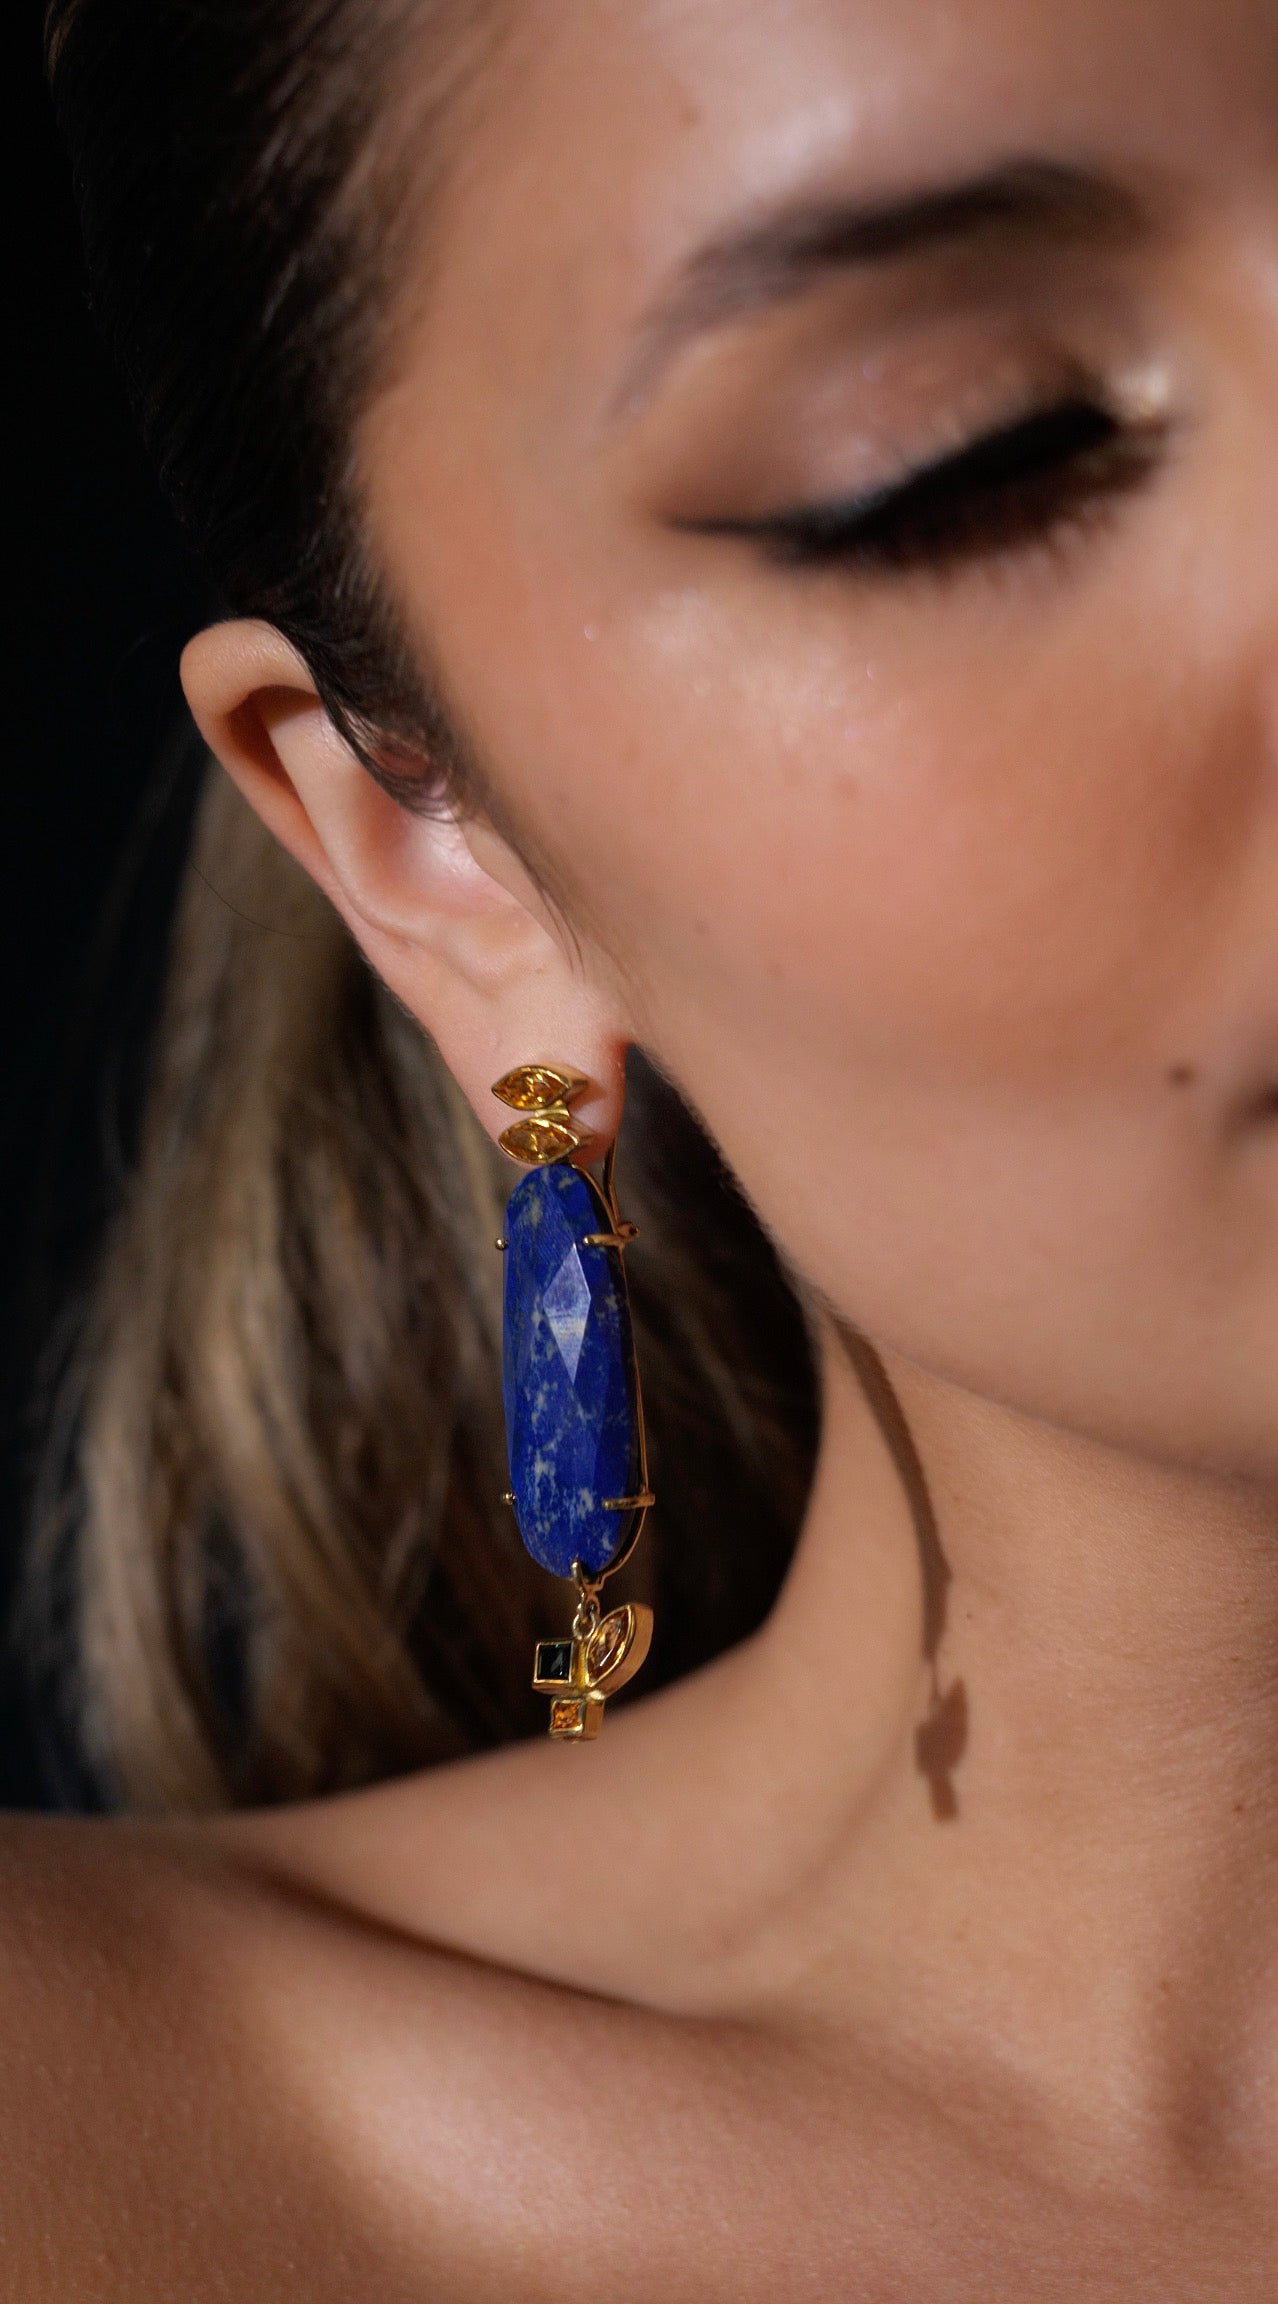 Lapis Lazuli, Tourmaline, Citrine, Pink Sapphire, and Yellow Gold Dangle Earrings, In Stock. These blue lapis cushion drop earrings have a dark blue lapis lazuli stone with white marbling that makes them statement earrings. Rich 18-karat yellow gold